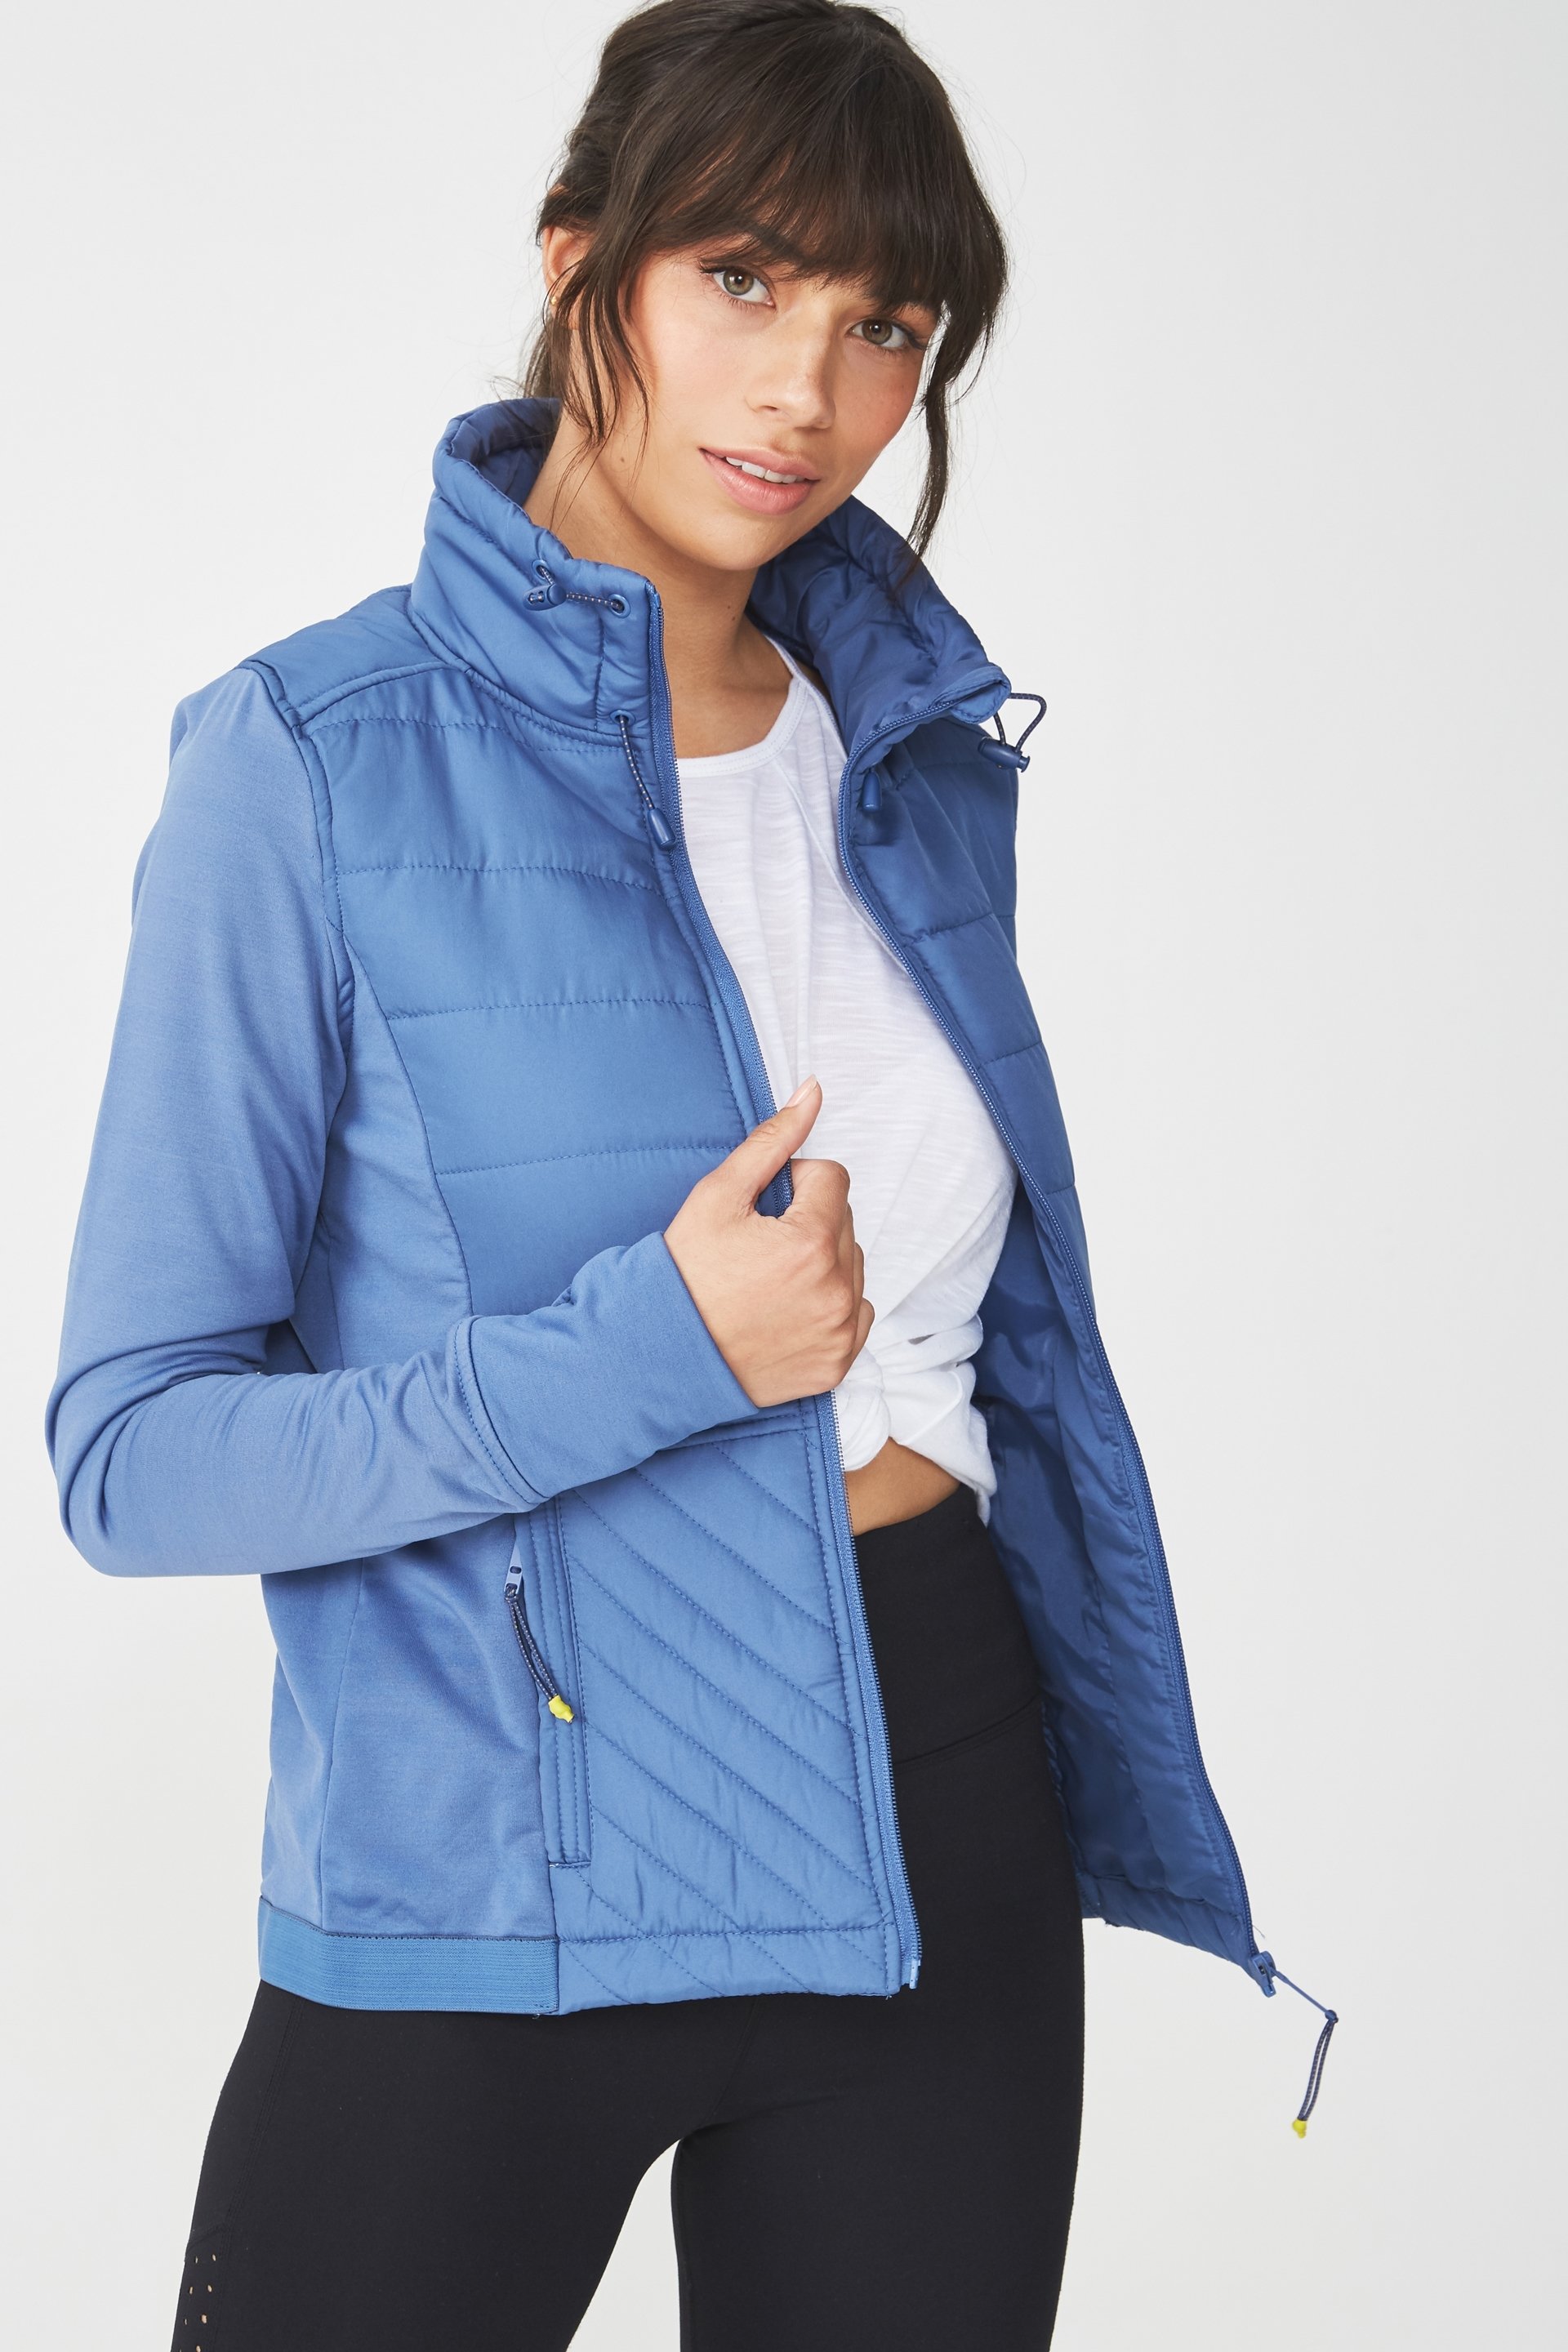 The Active Slimline Puffer Jacket is fitted with jersey side panels and sleeves that create a flattering shape. This winter puffer jacket is a workout wardrobe must-have with thumbholes in the cuffs keep your hands warm on cooler mornings. - Extra length at the back for more coverage - Comfortable relaxed fit - Zipper front - Tunnel shaped neckline - Drawcord with adjustable toggles - Elasticated waistband - Zip pockets - Soft fabric lining MODEL WEARS SIZE: SMALL - AU 10 US 6 EUR 38 BODY: 100% POLYESTER CONTRAST PANEL: 97% POLYESTER 3% ELASTANE LINING: 100% POLYESTER FILLING: 100% POLYESTER